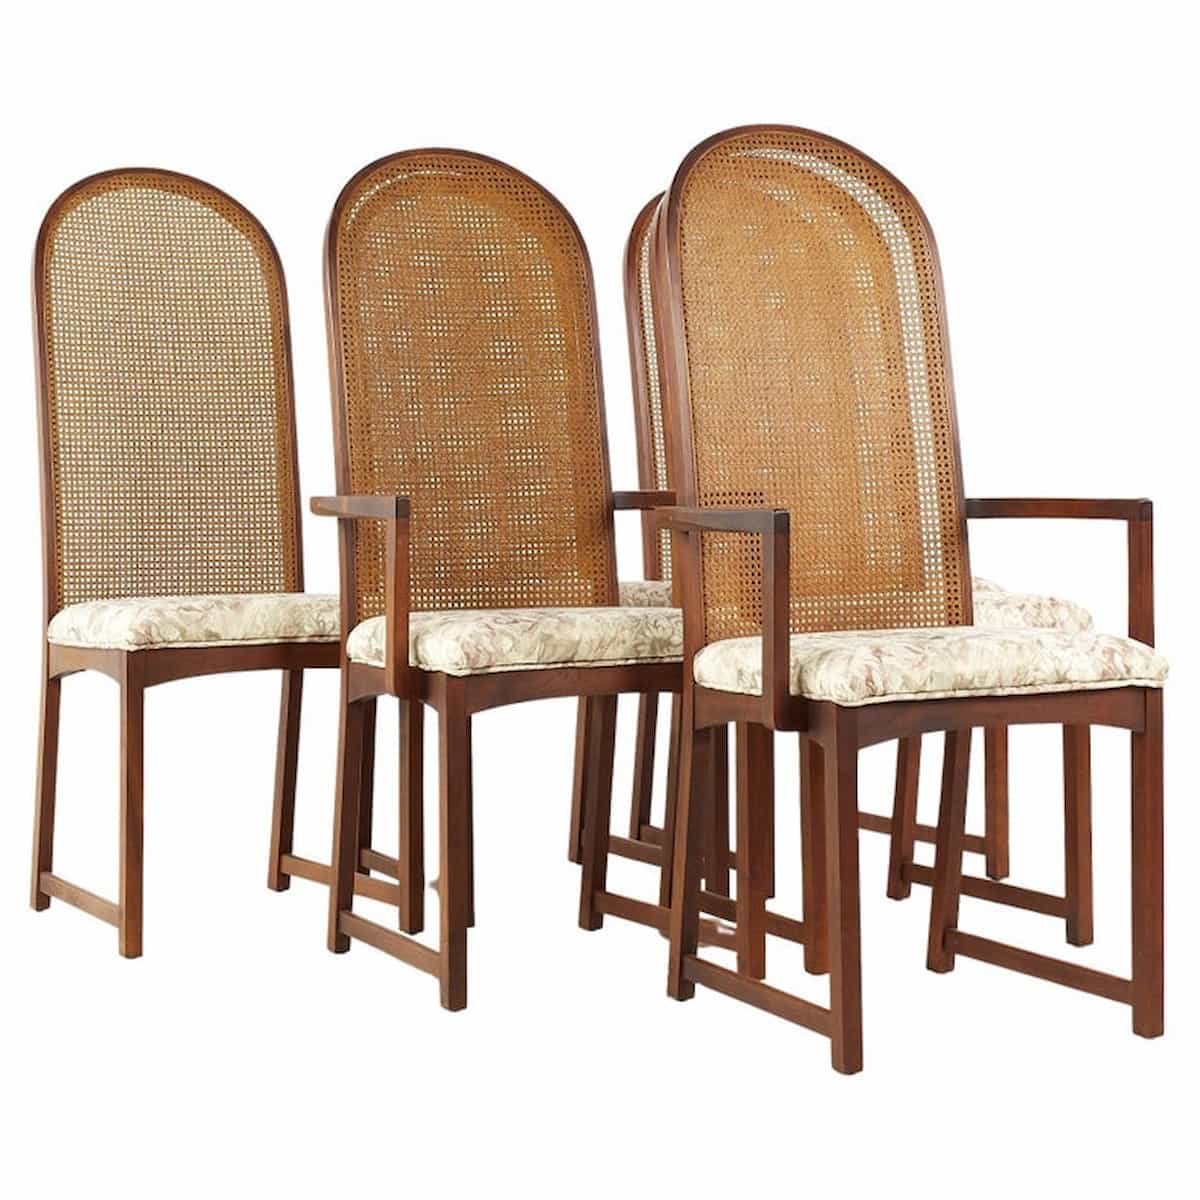 Milo Baughman for Directional Mid Century Walnut and Cane Back Dining Chairs  – Set of 6 | Mid Century Modern Furniture | Modern Hill | Barhocker